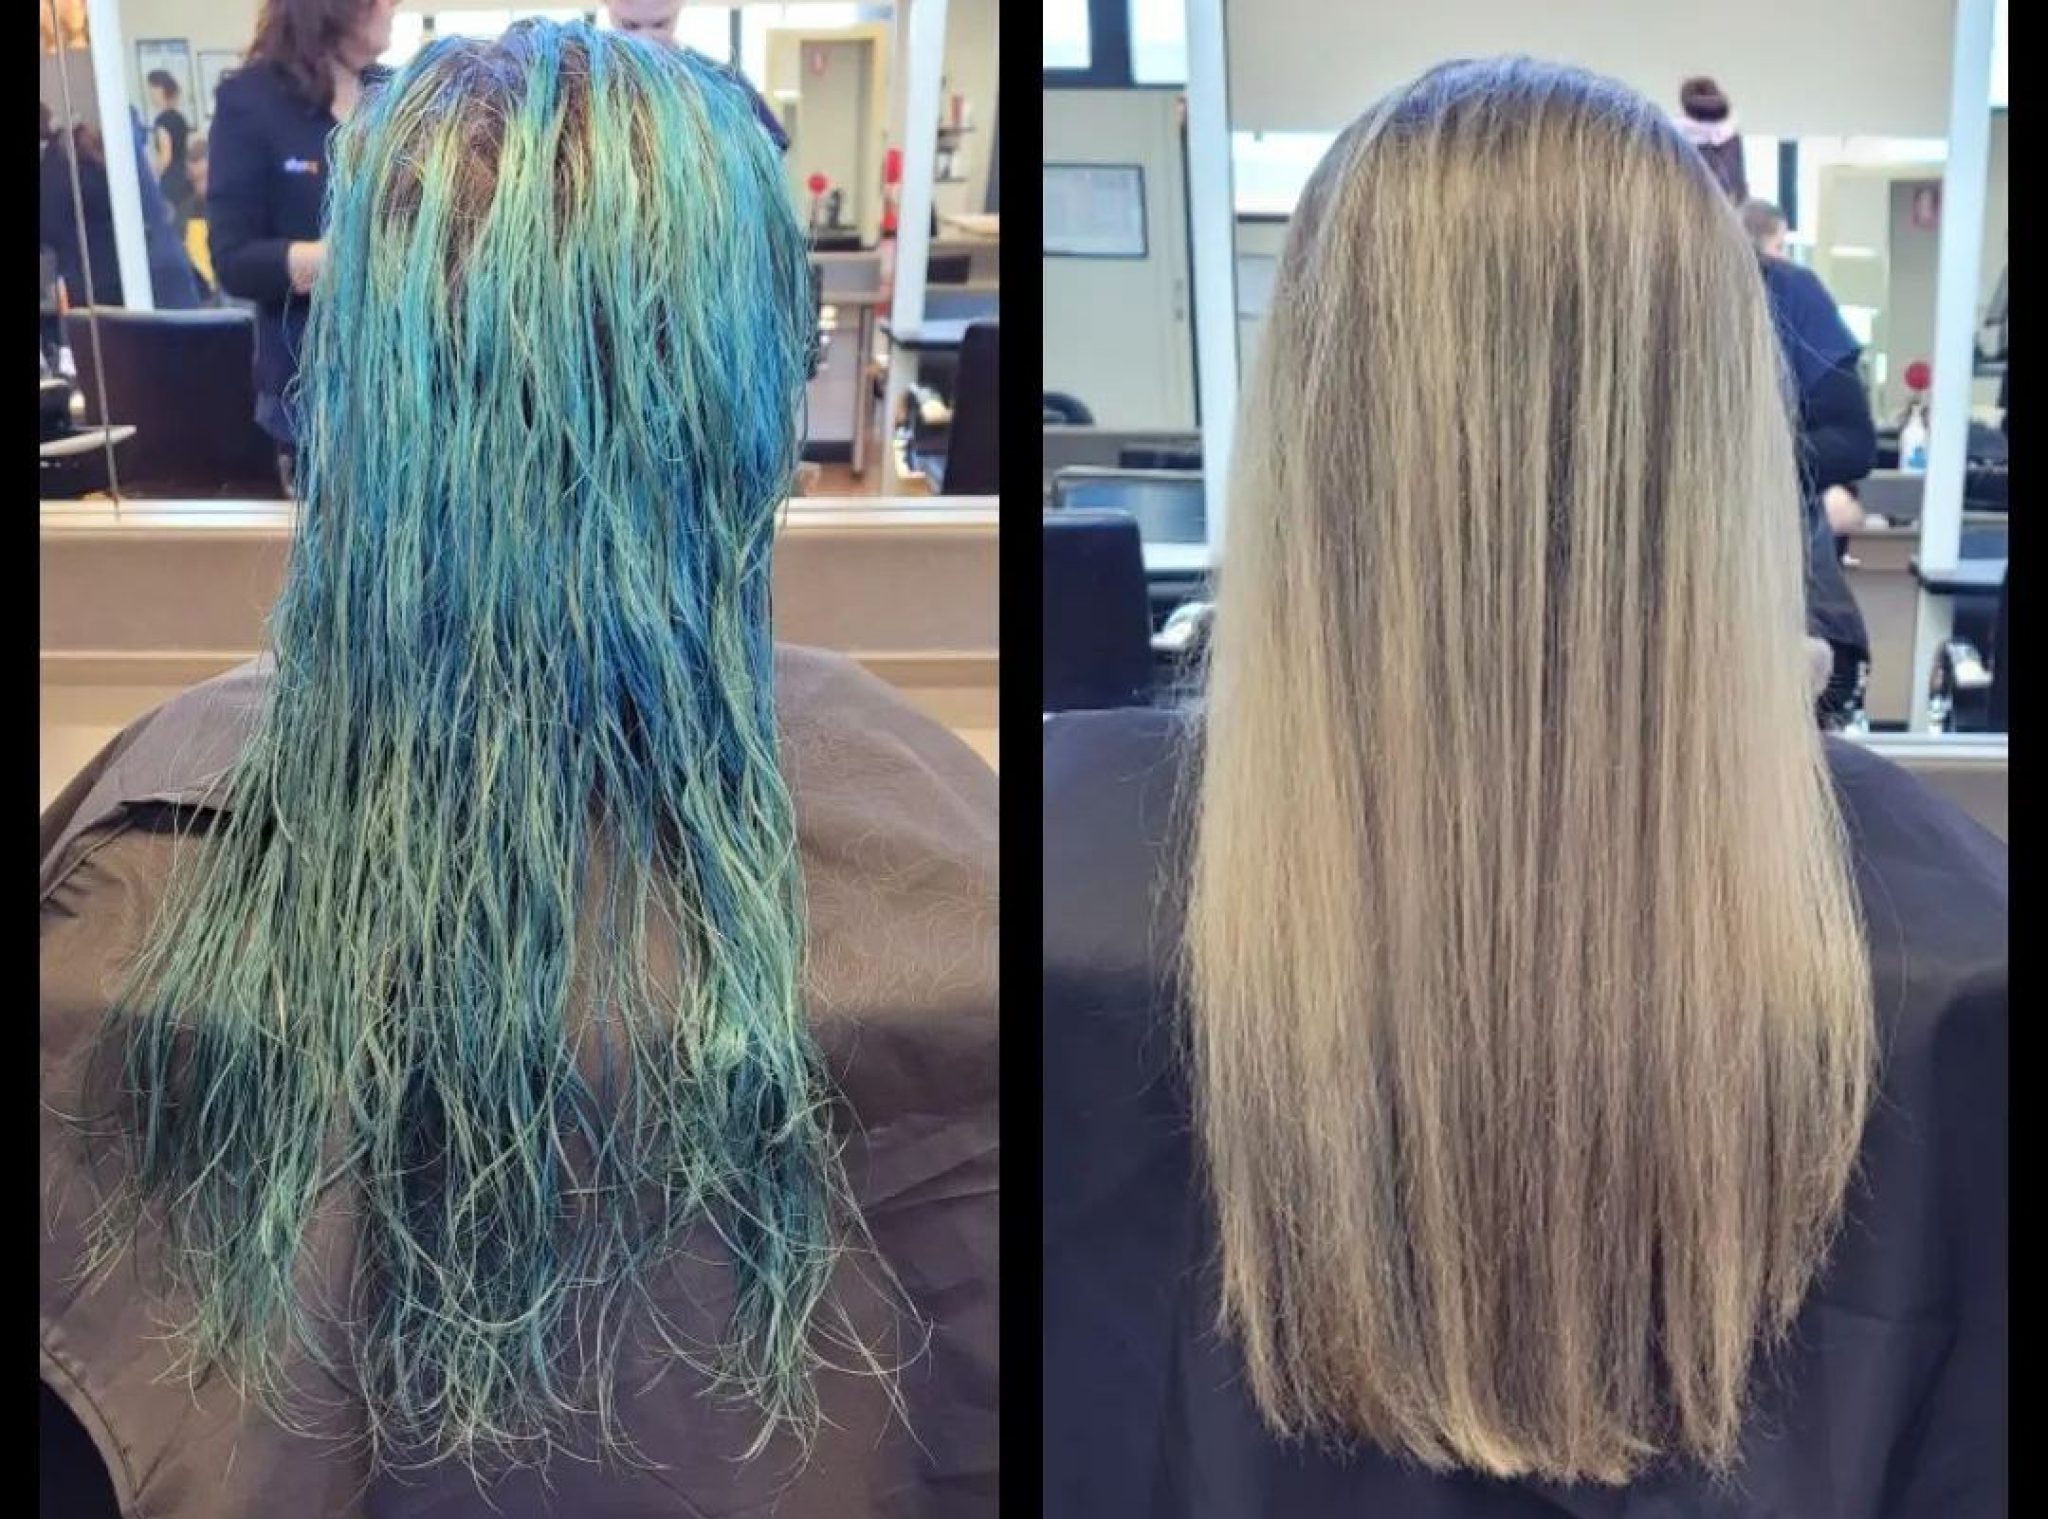 1. How to Remove Blue Hair Dye - wide 3